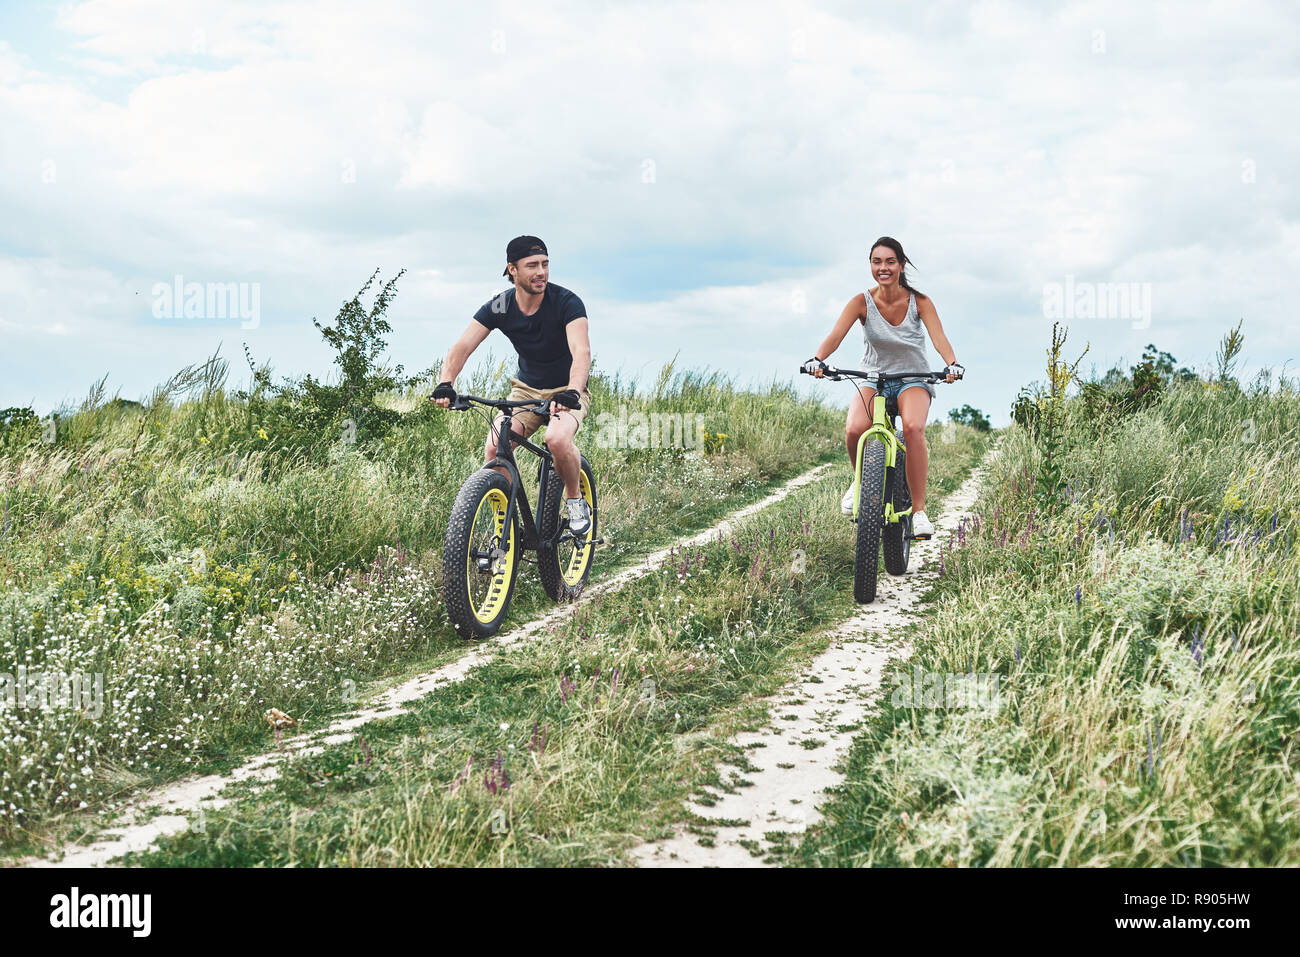 A man and a woman are laughing and riding fatbikes Stock Photo